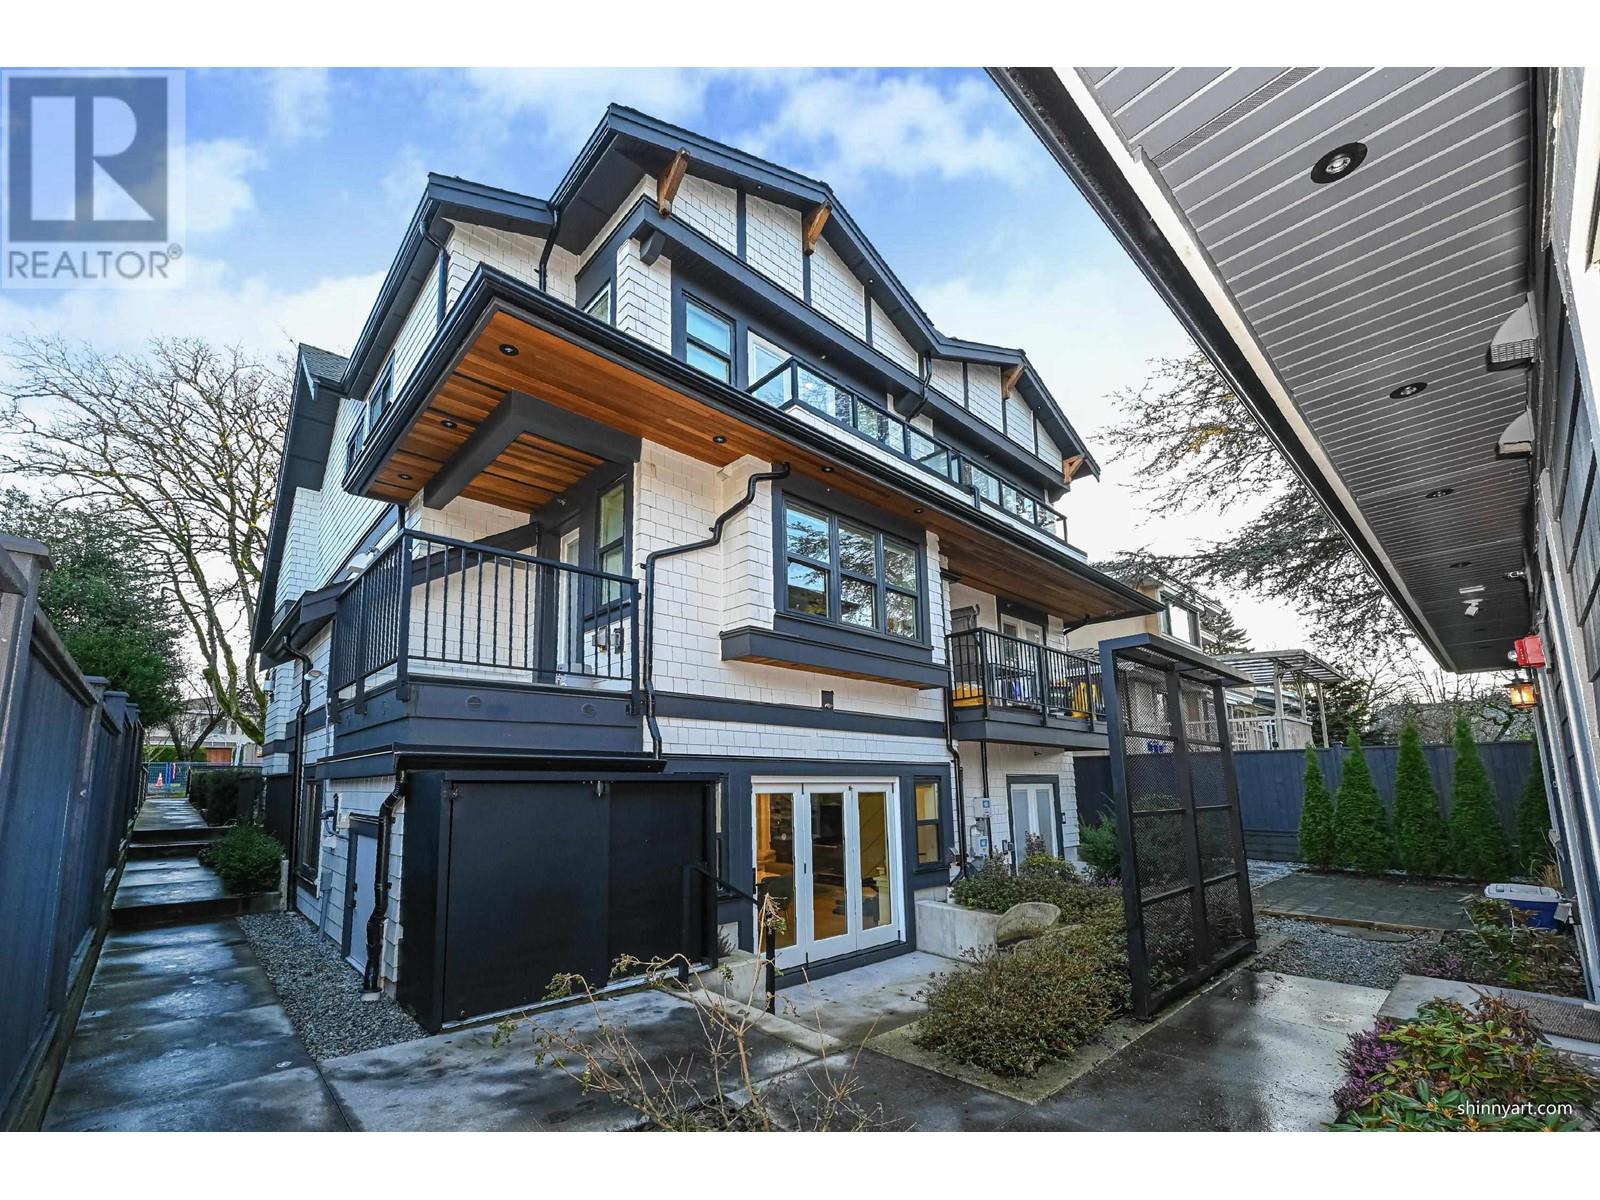 Listing Picture 2 of 29 : 3255 W KING EDWARD AVENUE, Vancouver / 溫哥華 - 魯藝地產 Yvonne Lu Group - MLS Medallion Club Member